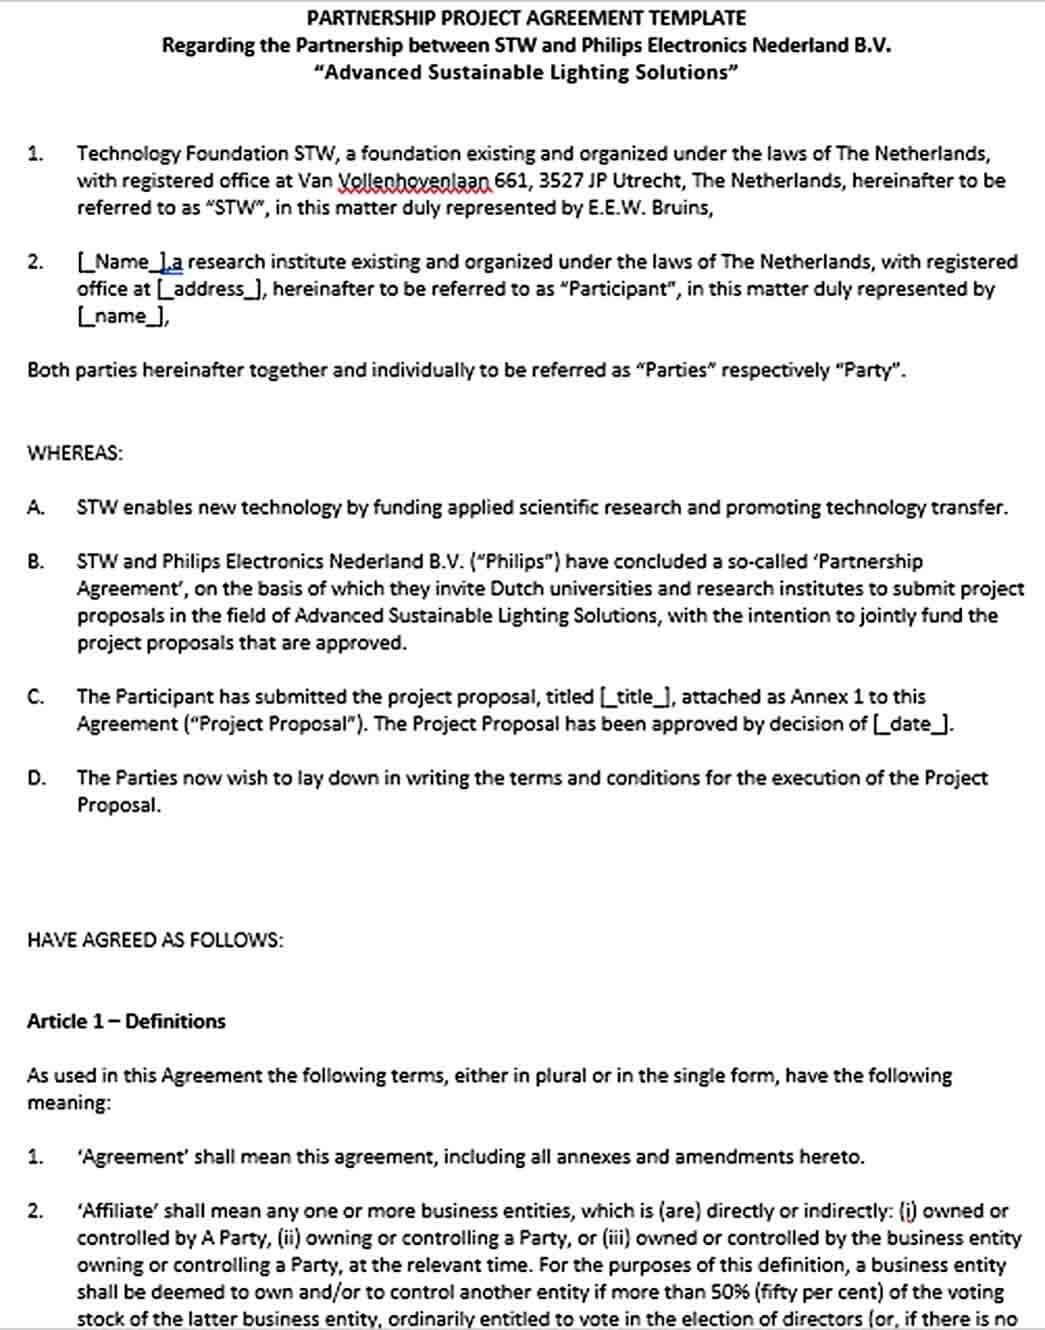 Sample Business Partnership Project Agreement Template in Word